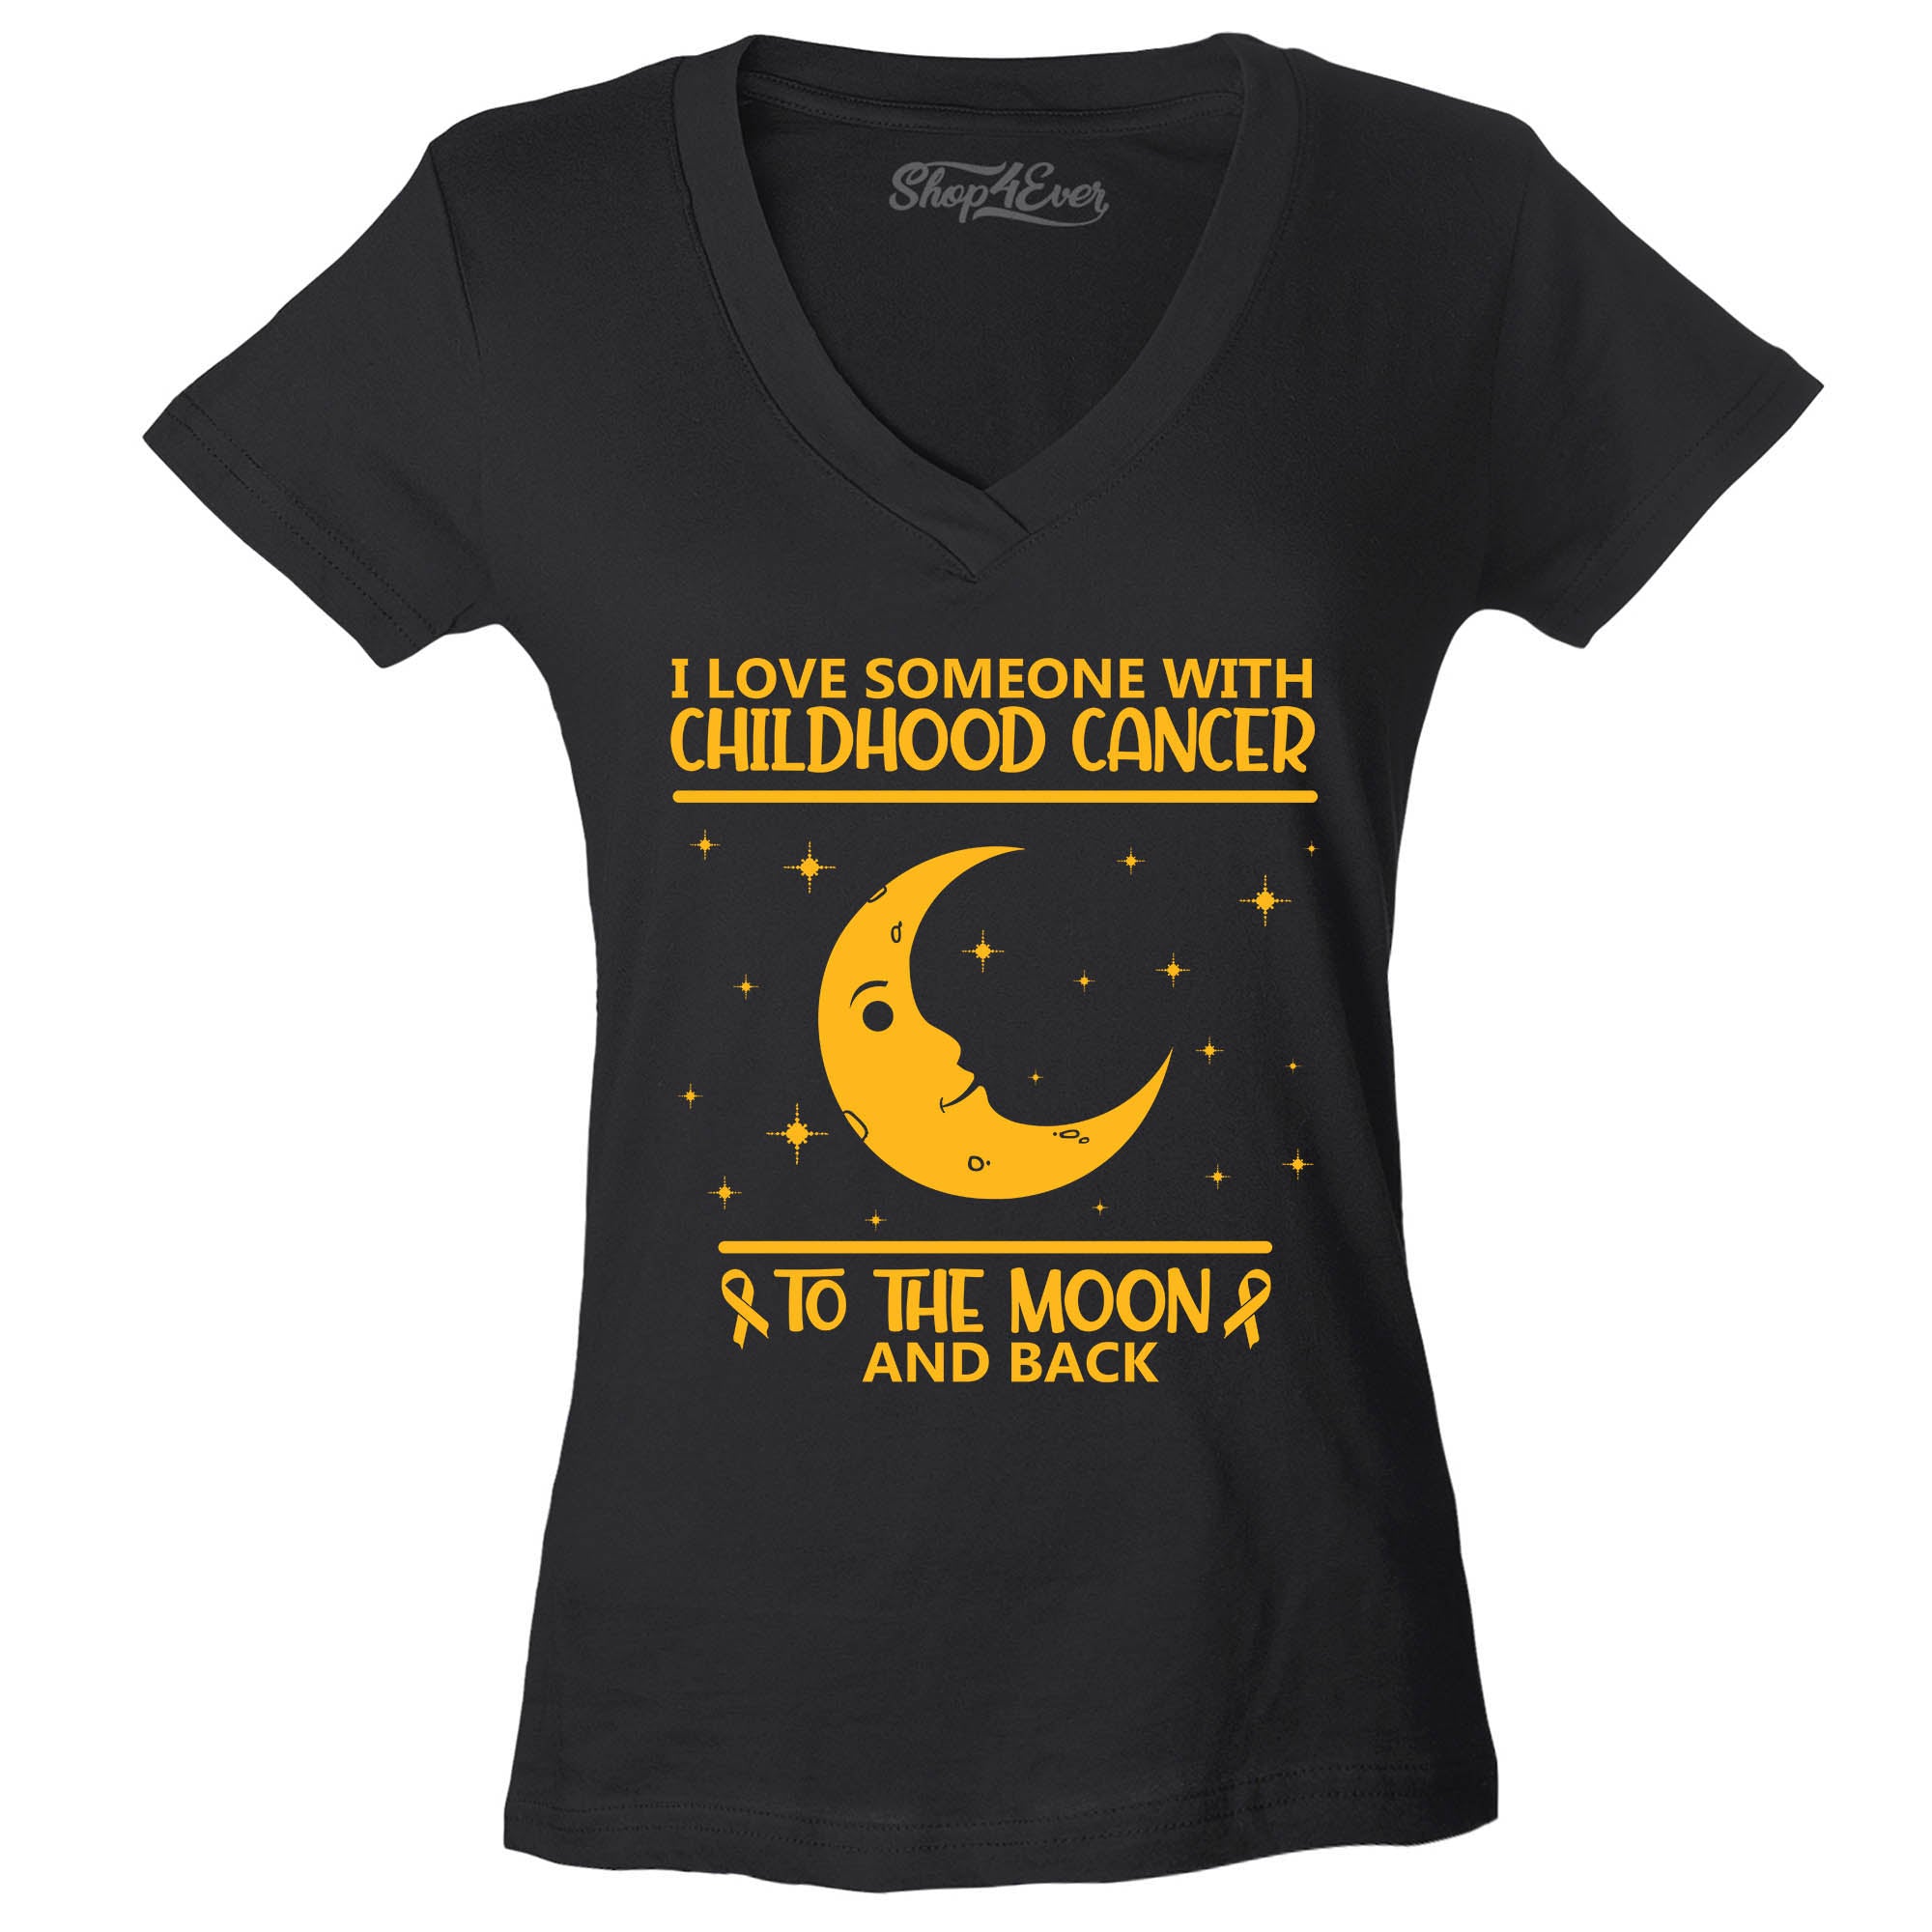 I Love Someone with Childhood Cancer to The Moon and Back Women's V-Neck T-Shirt Slim Fit